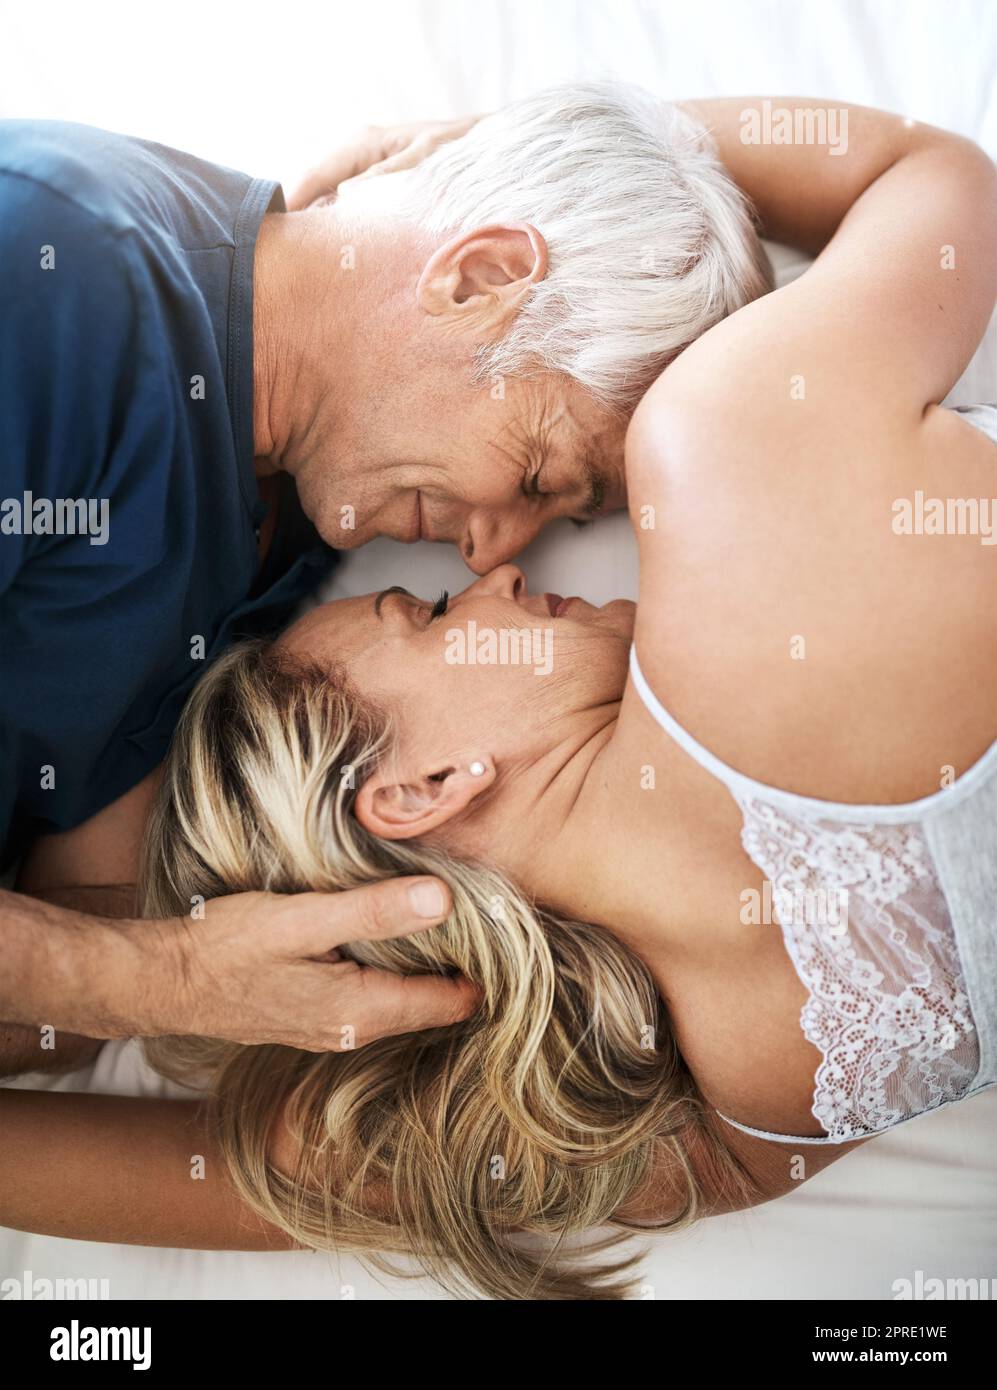 True love brings peace. an affectionate mature couple lying in bed together at home. Stock Photo